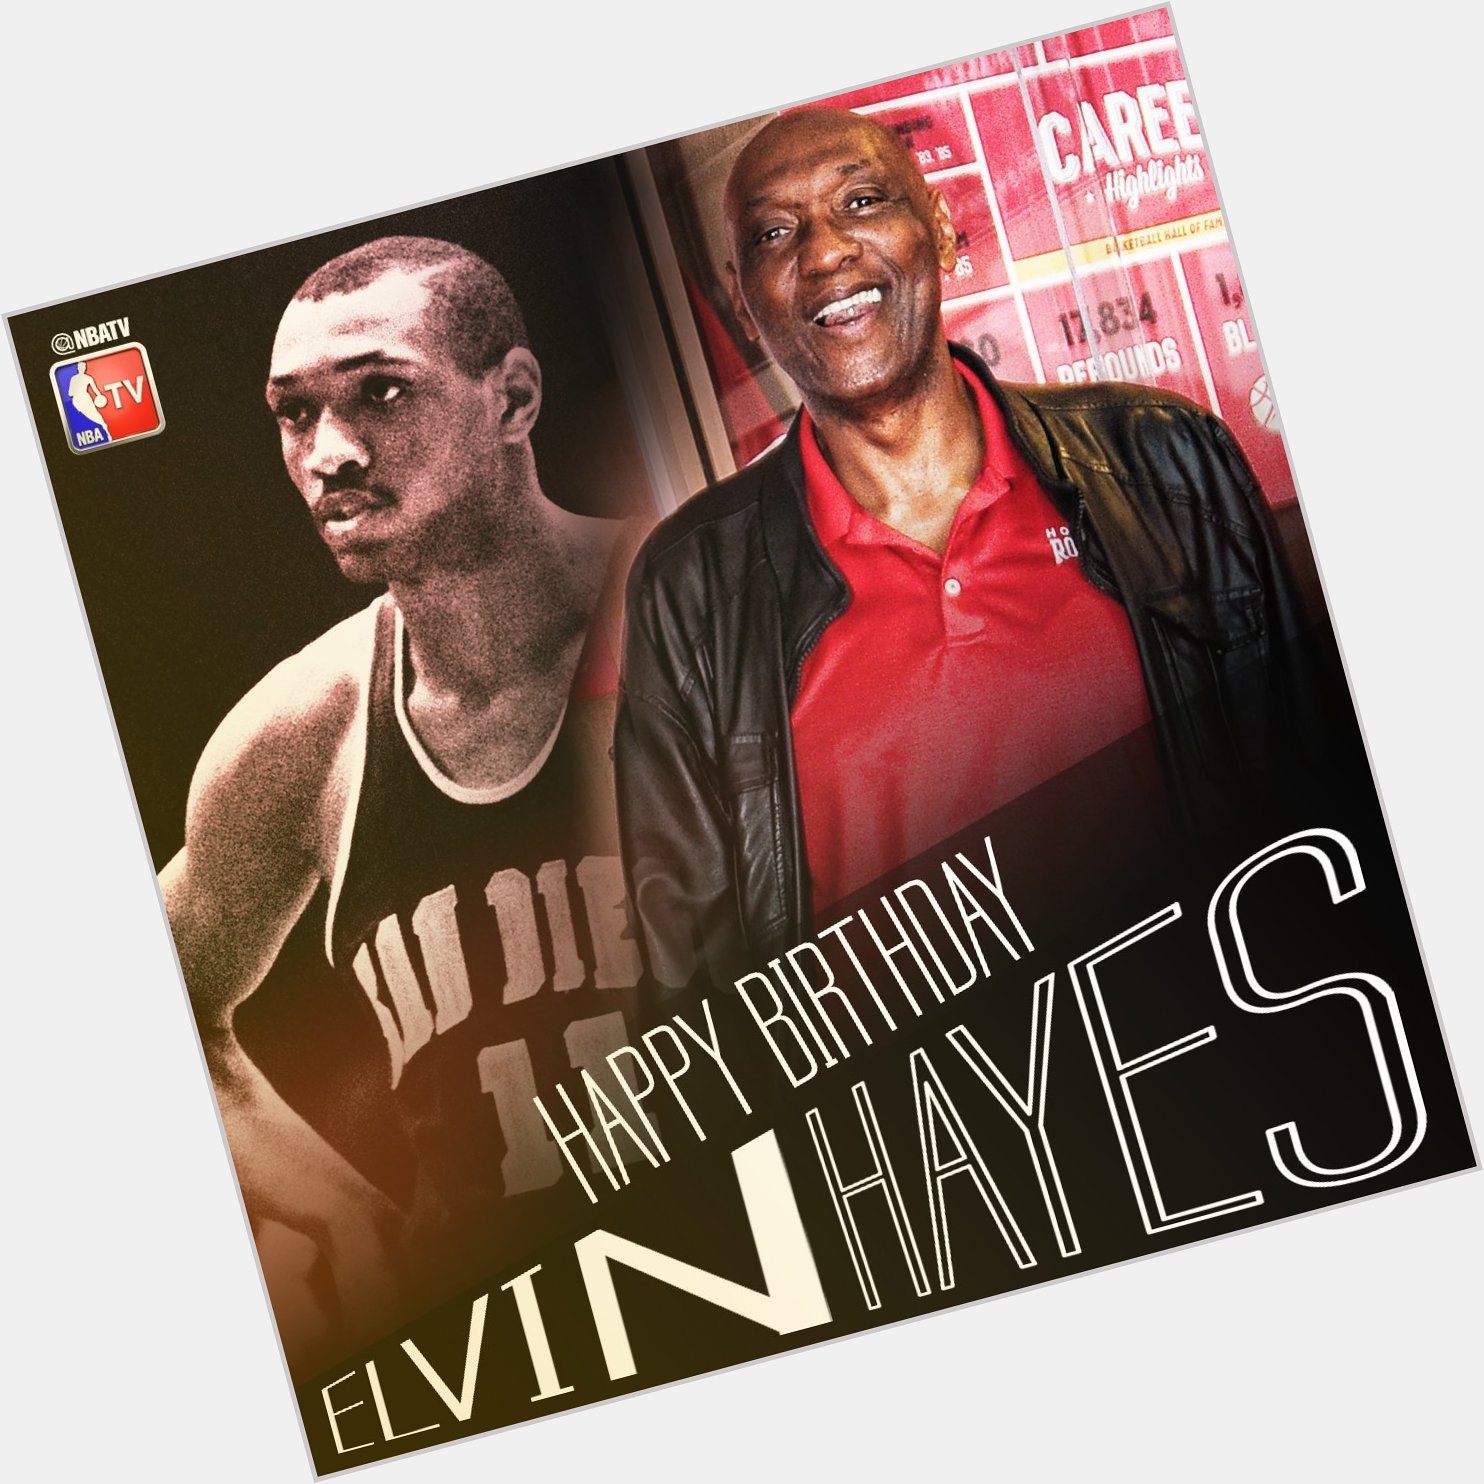 Happy Birthday to 12x All-Star, 1968 first overall pick, and Hall of Famer, Elvin Hayes! 